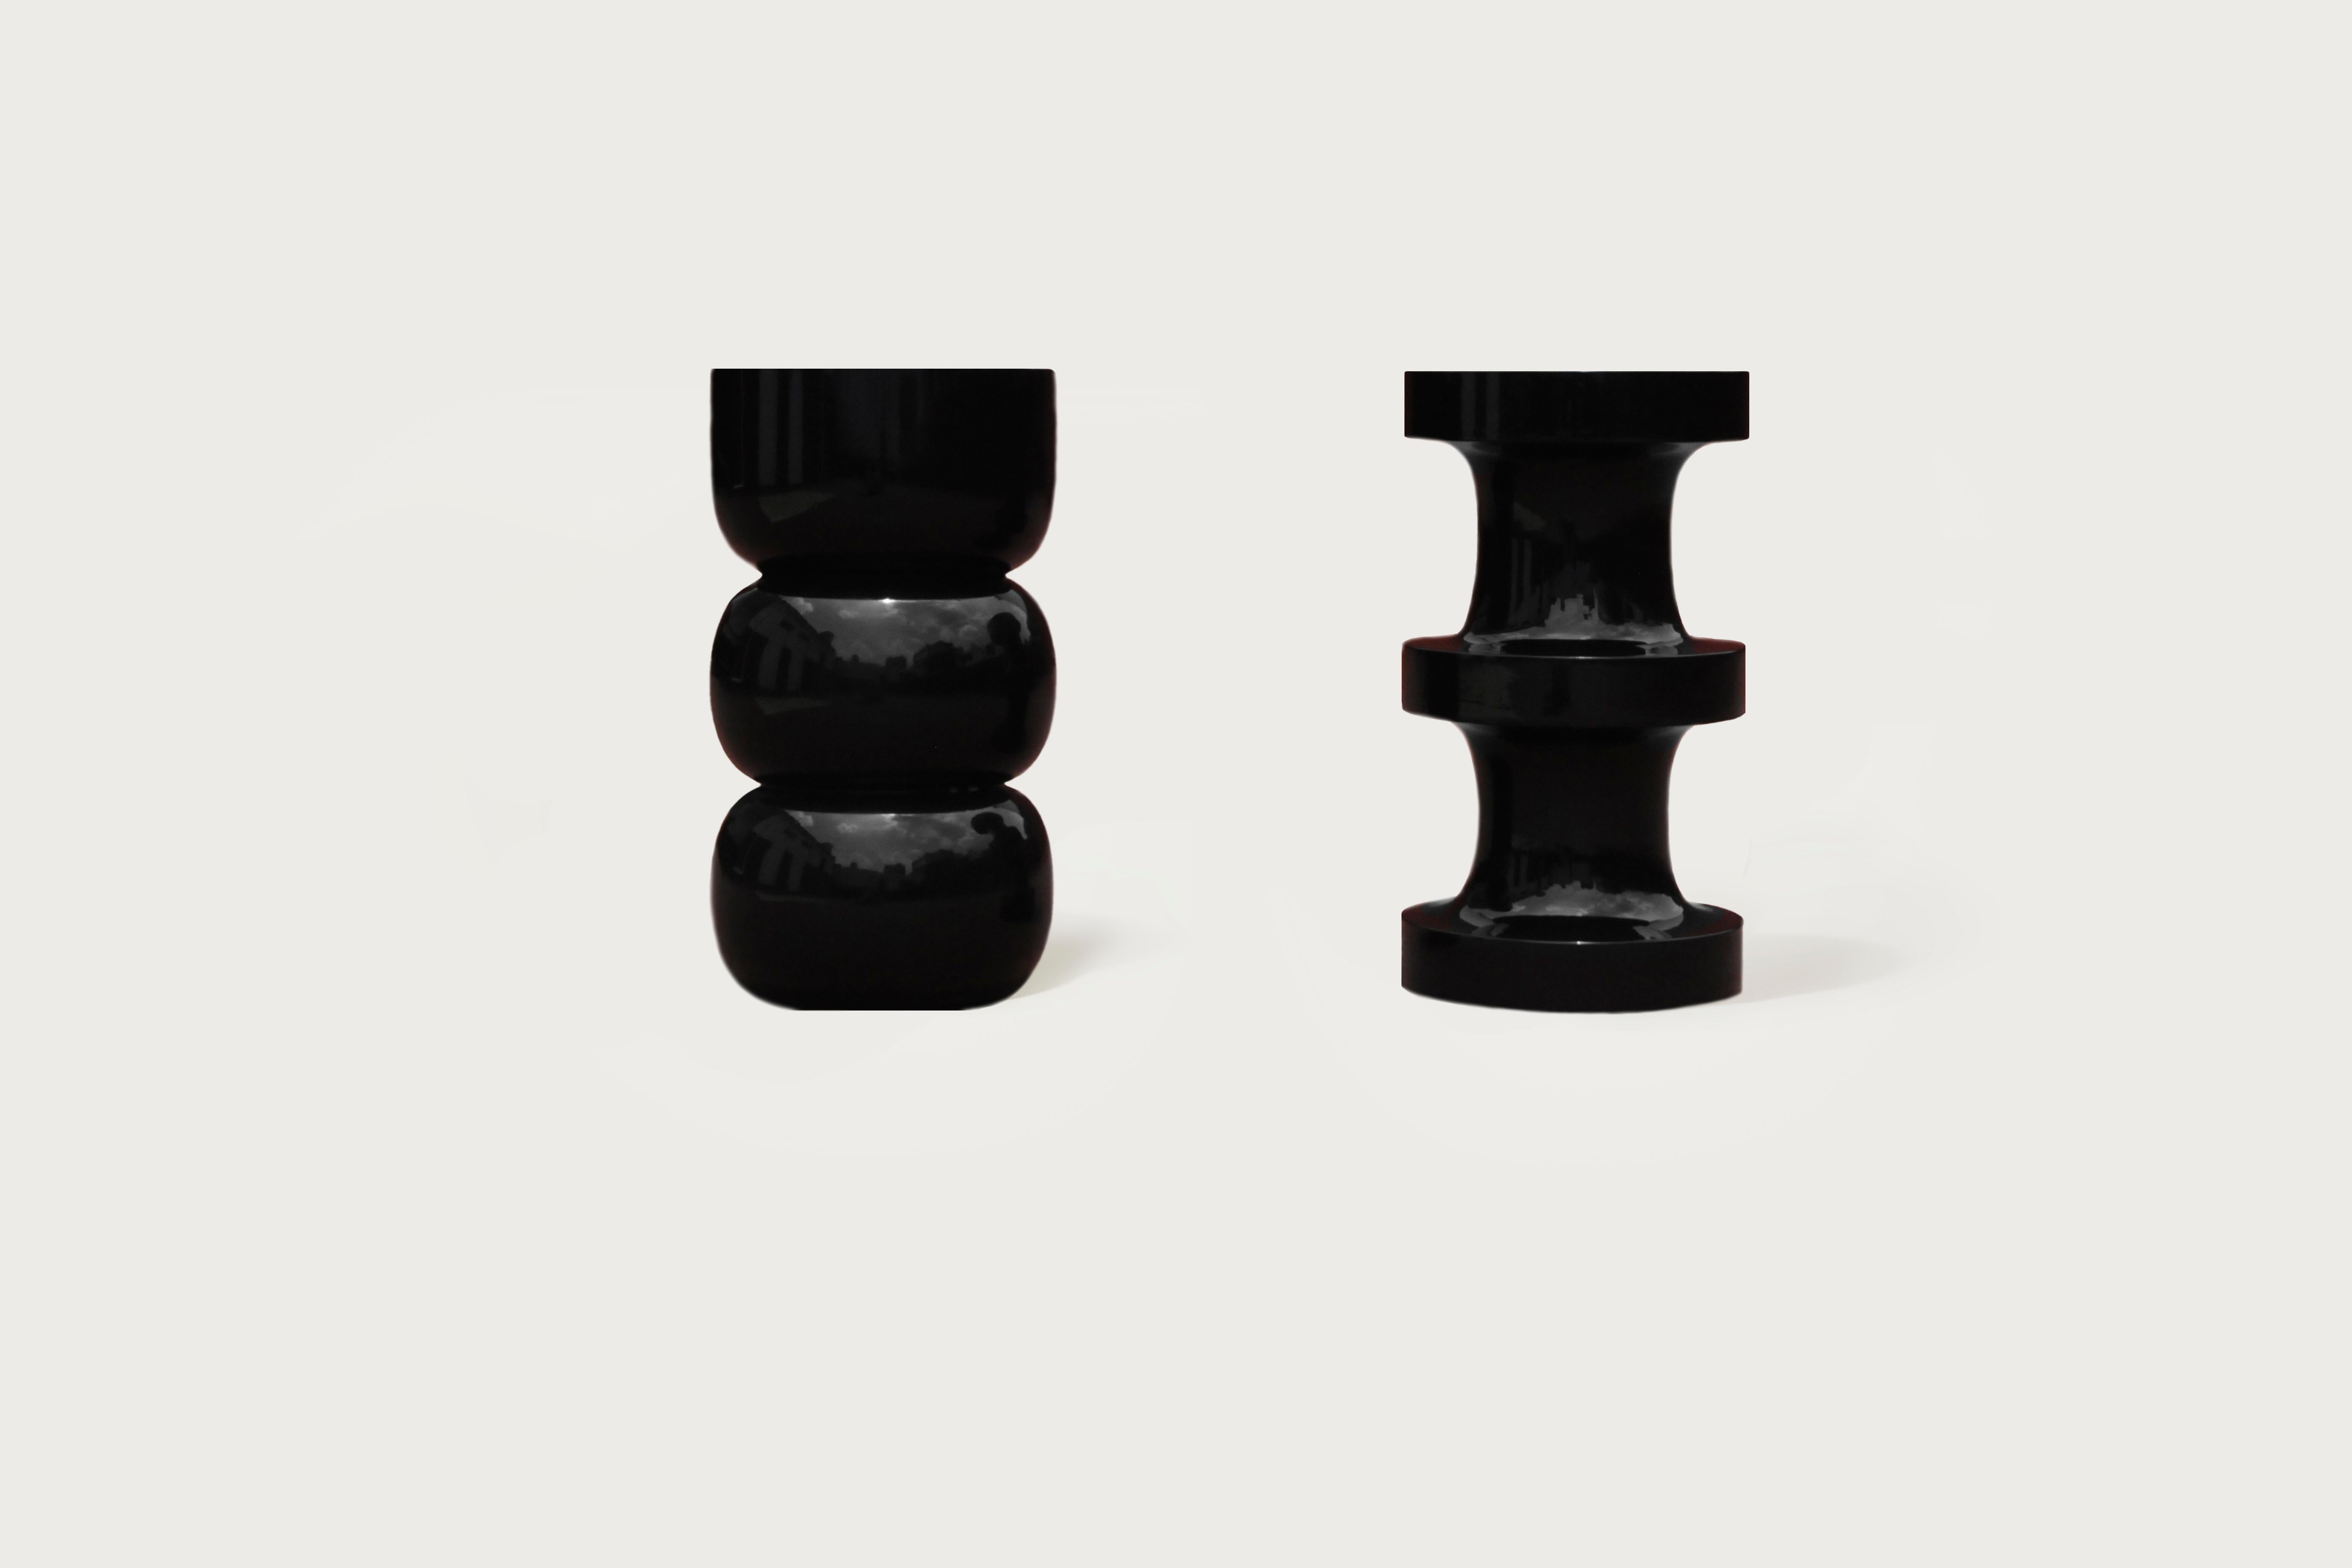 A set of chess piece stool and side table by Panorammma
Materials: wood, resin. 
Dimensions: 45 x 30 cm

Panorammma is a furniture design atelier based in Mexico City that seeks to redefine our relation to functional objects through